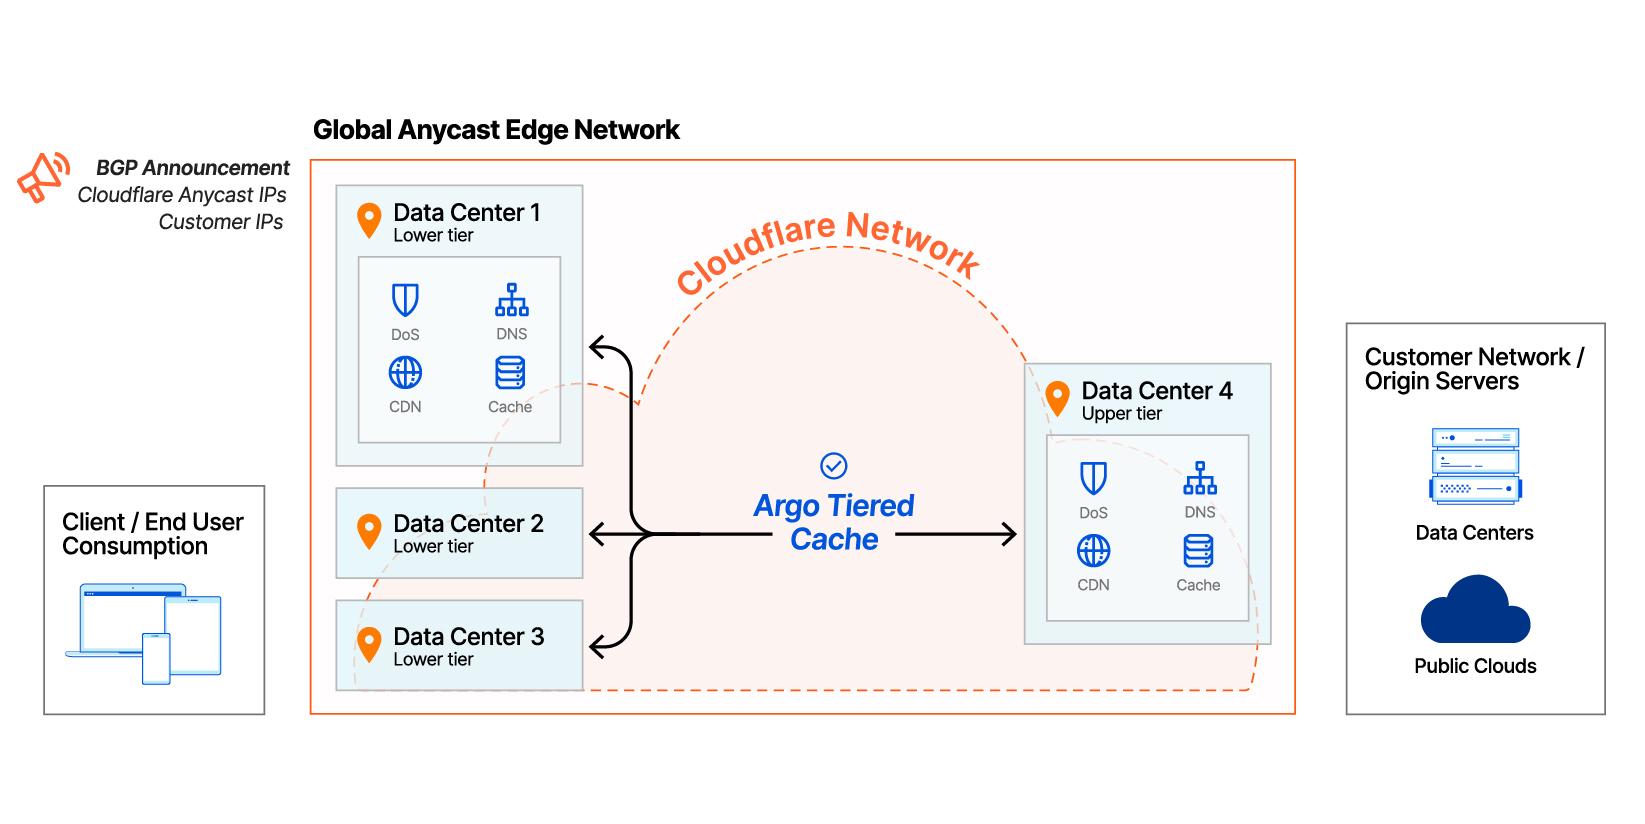 Figure 3: Cloudflare CDN with Argo Tiered Cache on global Anycast edge network